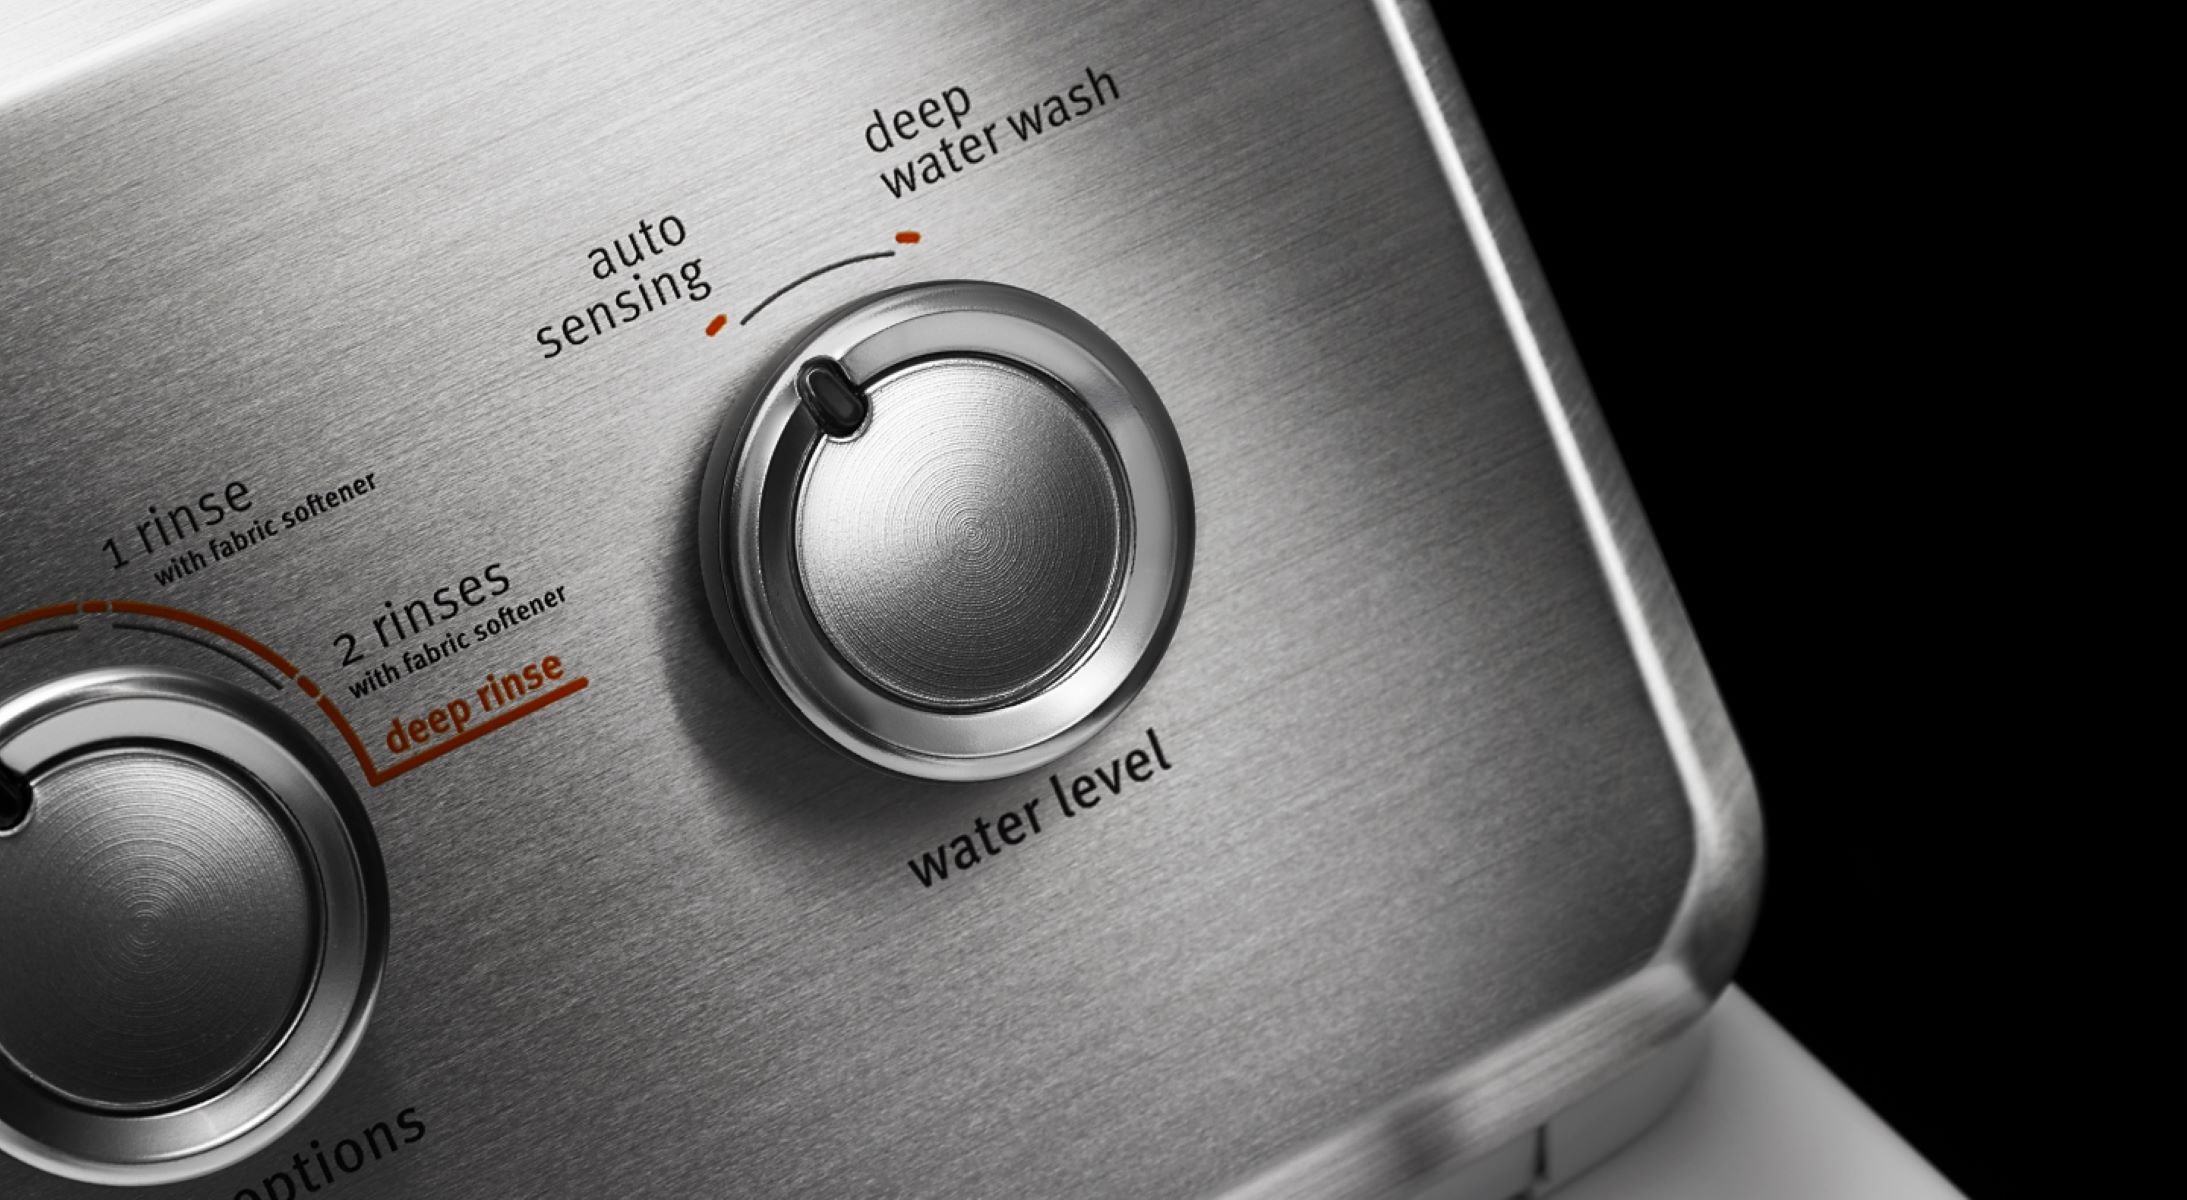 What Does Auto Sensing Mean On A Washing Machine